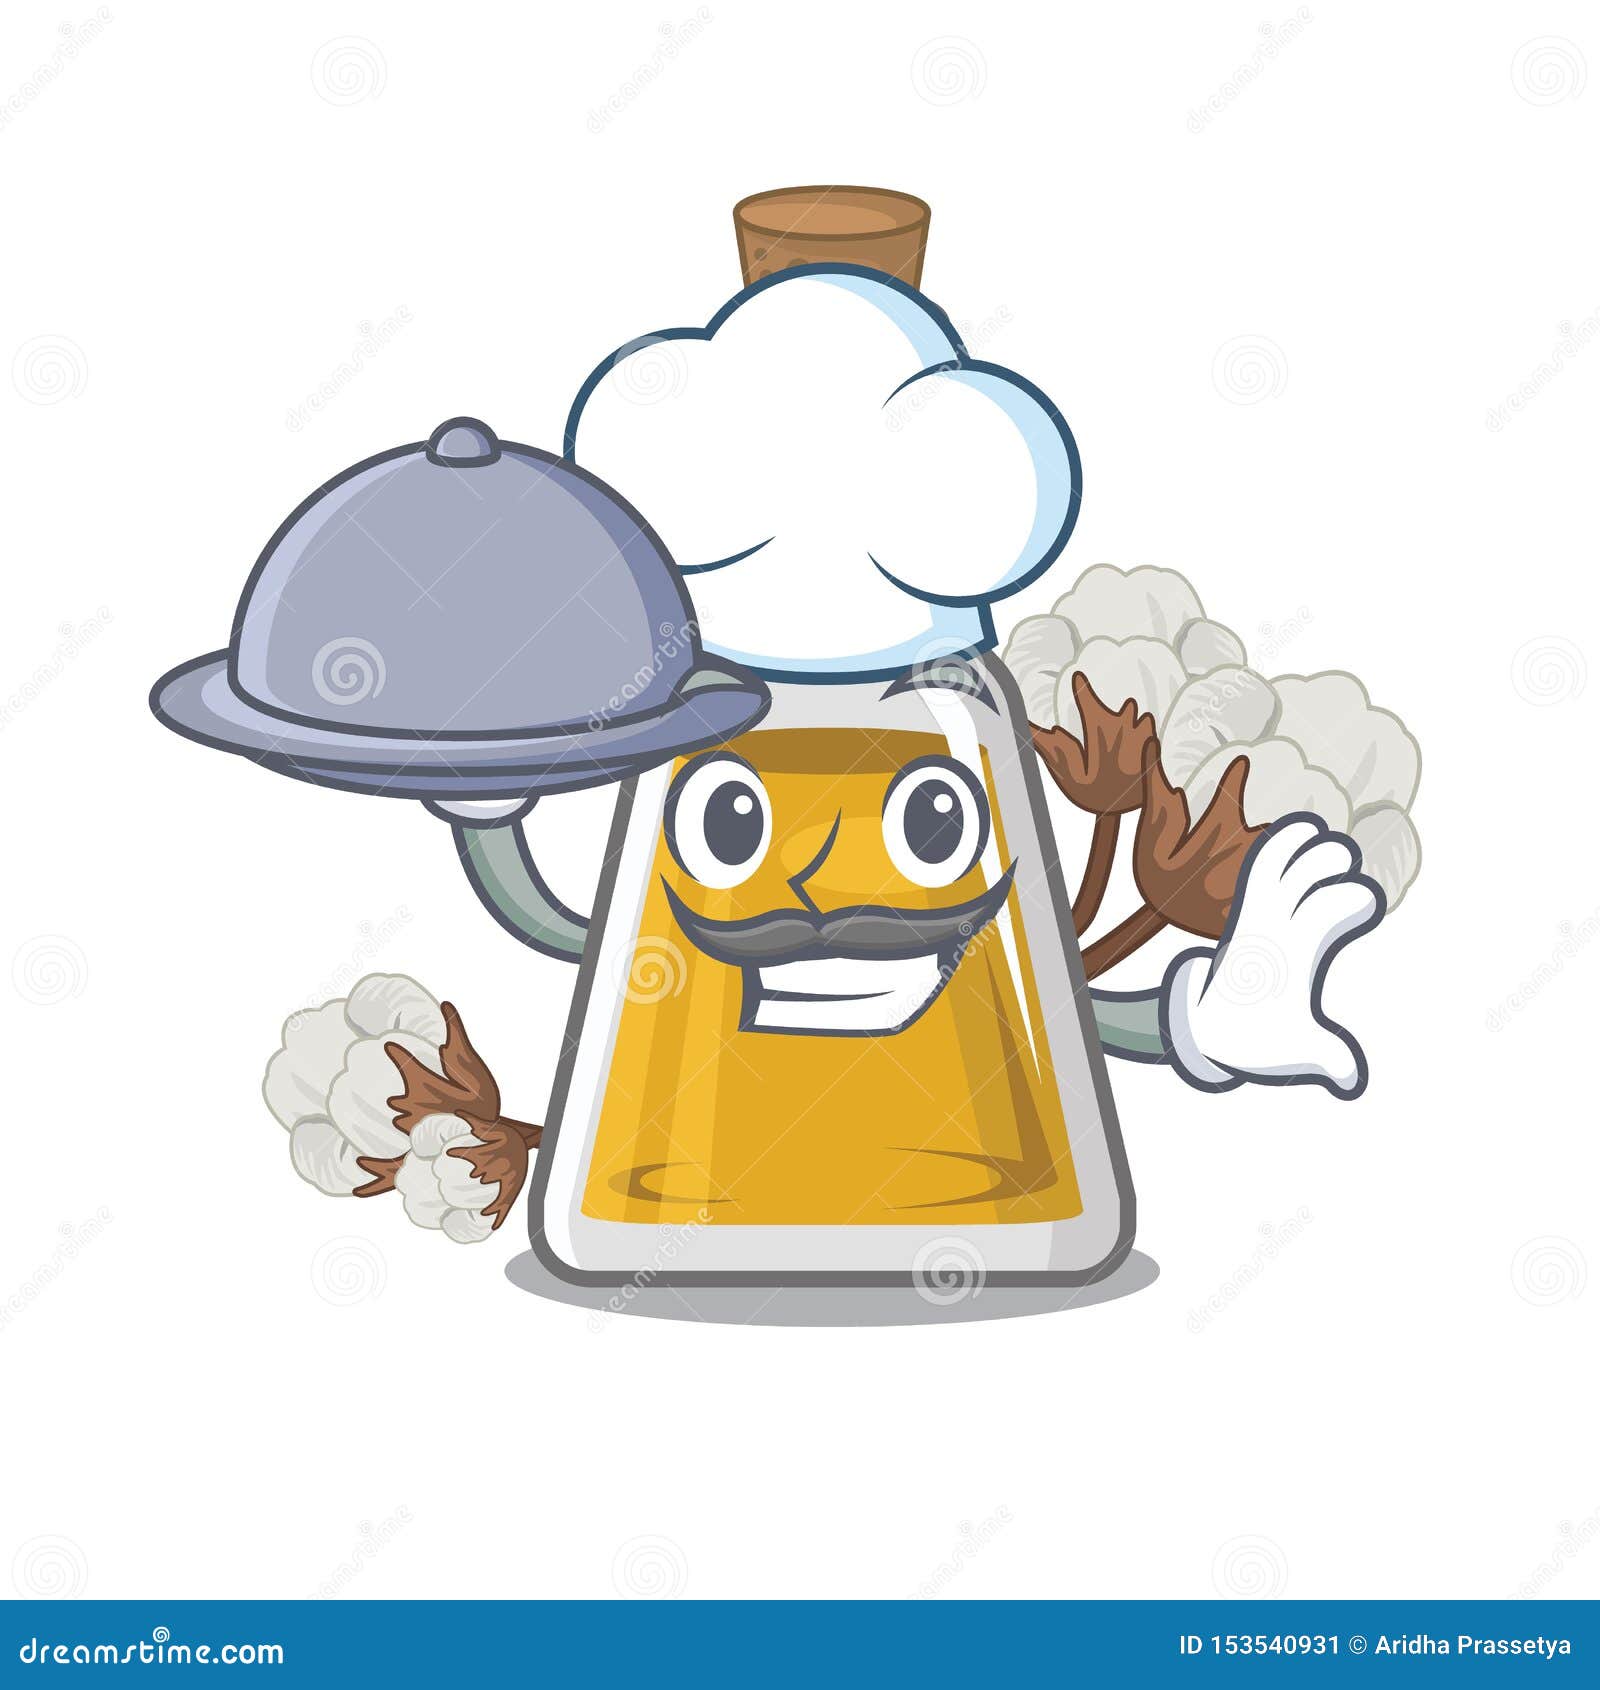 chef with food cottonseed oil in the cartoon 